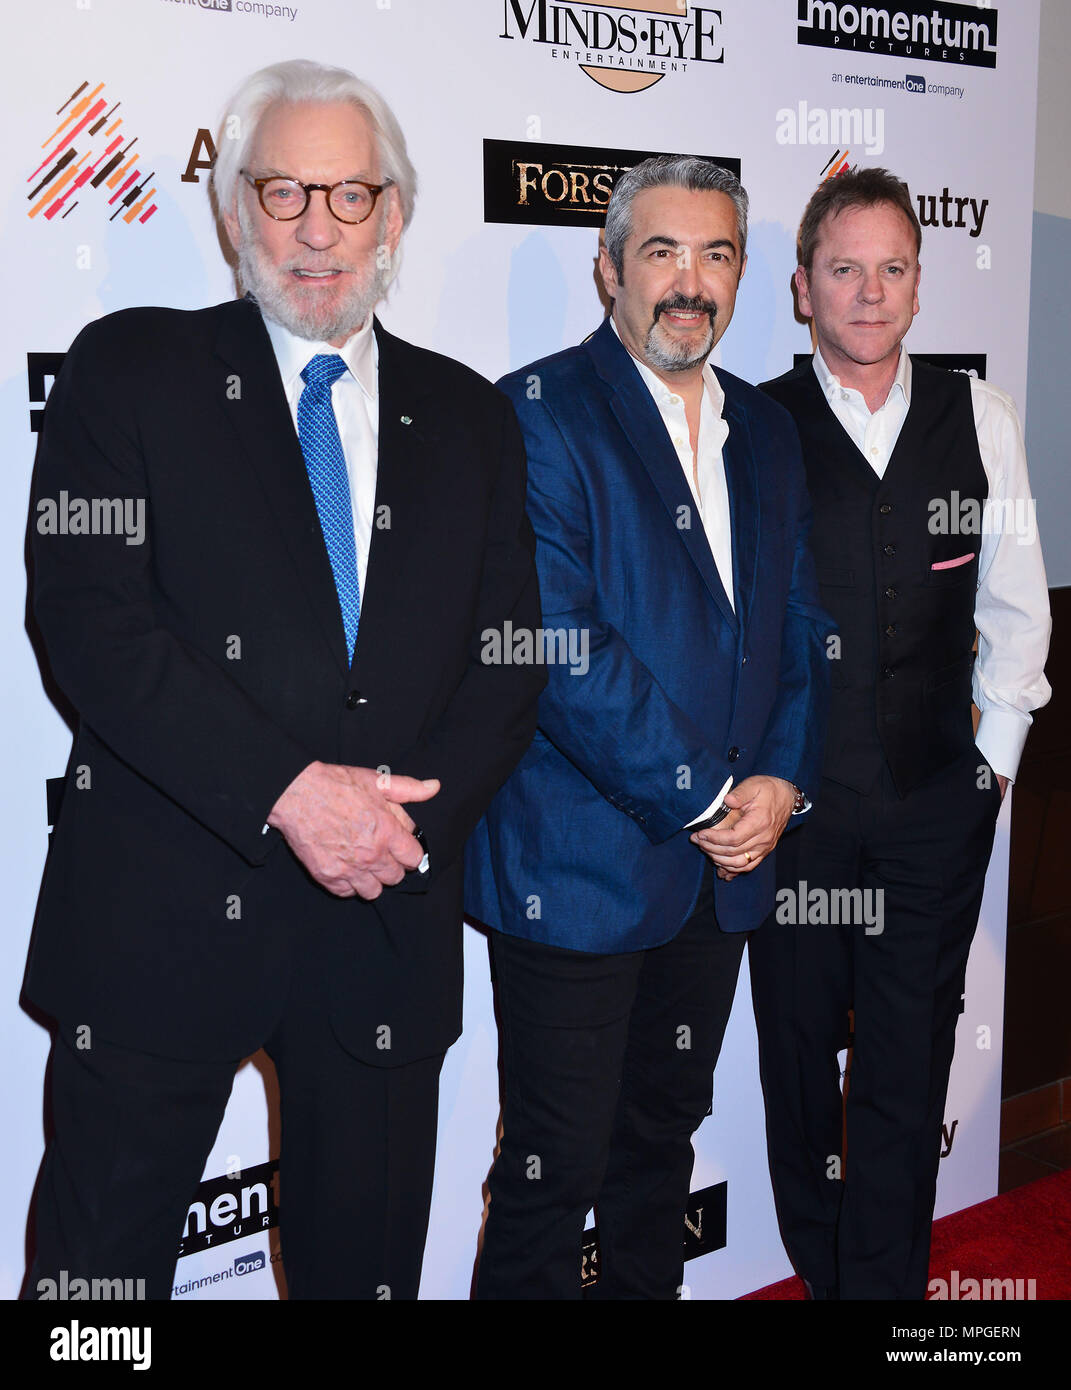 Donald Sutherland, Kiefer Sutherland and John Cassar - director 132 at Forsaken Premiere at the Autry Museum in Los Angeles. February 16, 2016.Donald Sutherland, Kiefer Sutherland and John Cassar - director 132  Event in Hollywood Life - California, Red Carpet Event, USA, Film Industry, Celebrities, Photography, Bestof, Arts Culture and Entertainment, Topix Celebrities fashion, Best of, Hollywood Life, Event in Hollywood Life - California, Red Carpet and backstage, movie celebrities, TV celebrities, Music celebrities, Arts Culture and Entertainment, vertical, one person, Photography,    inquir Stock Photo